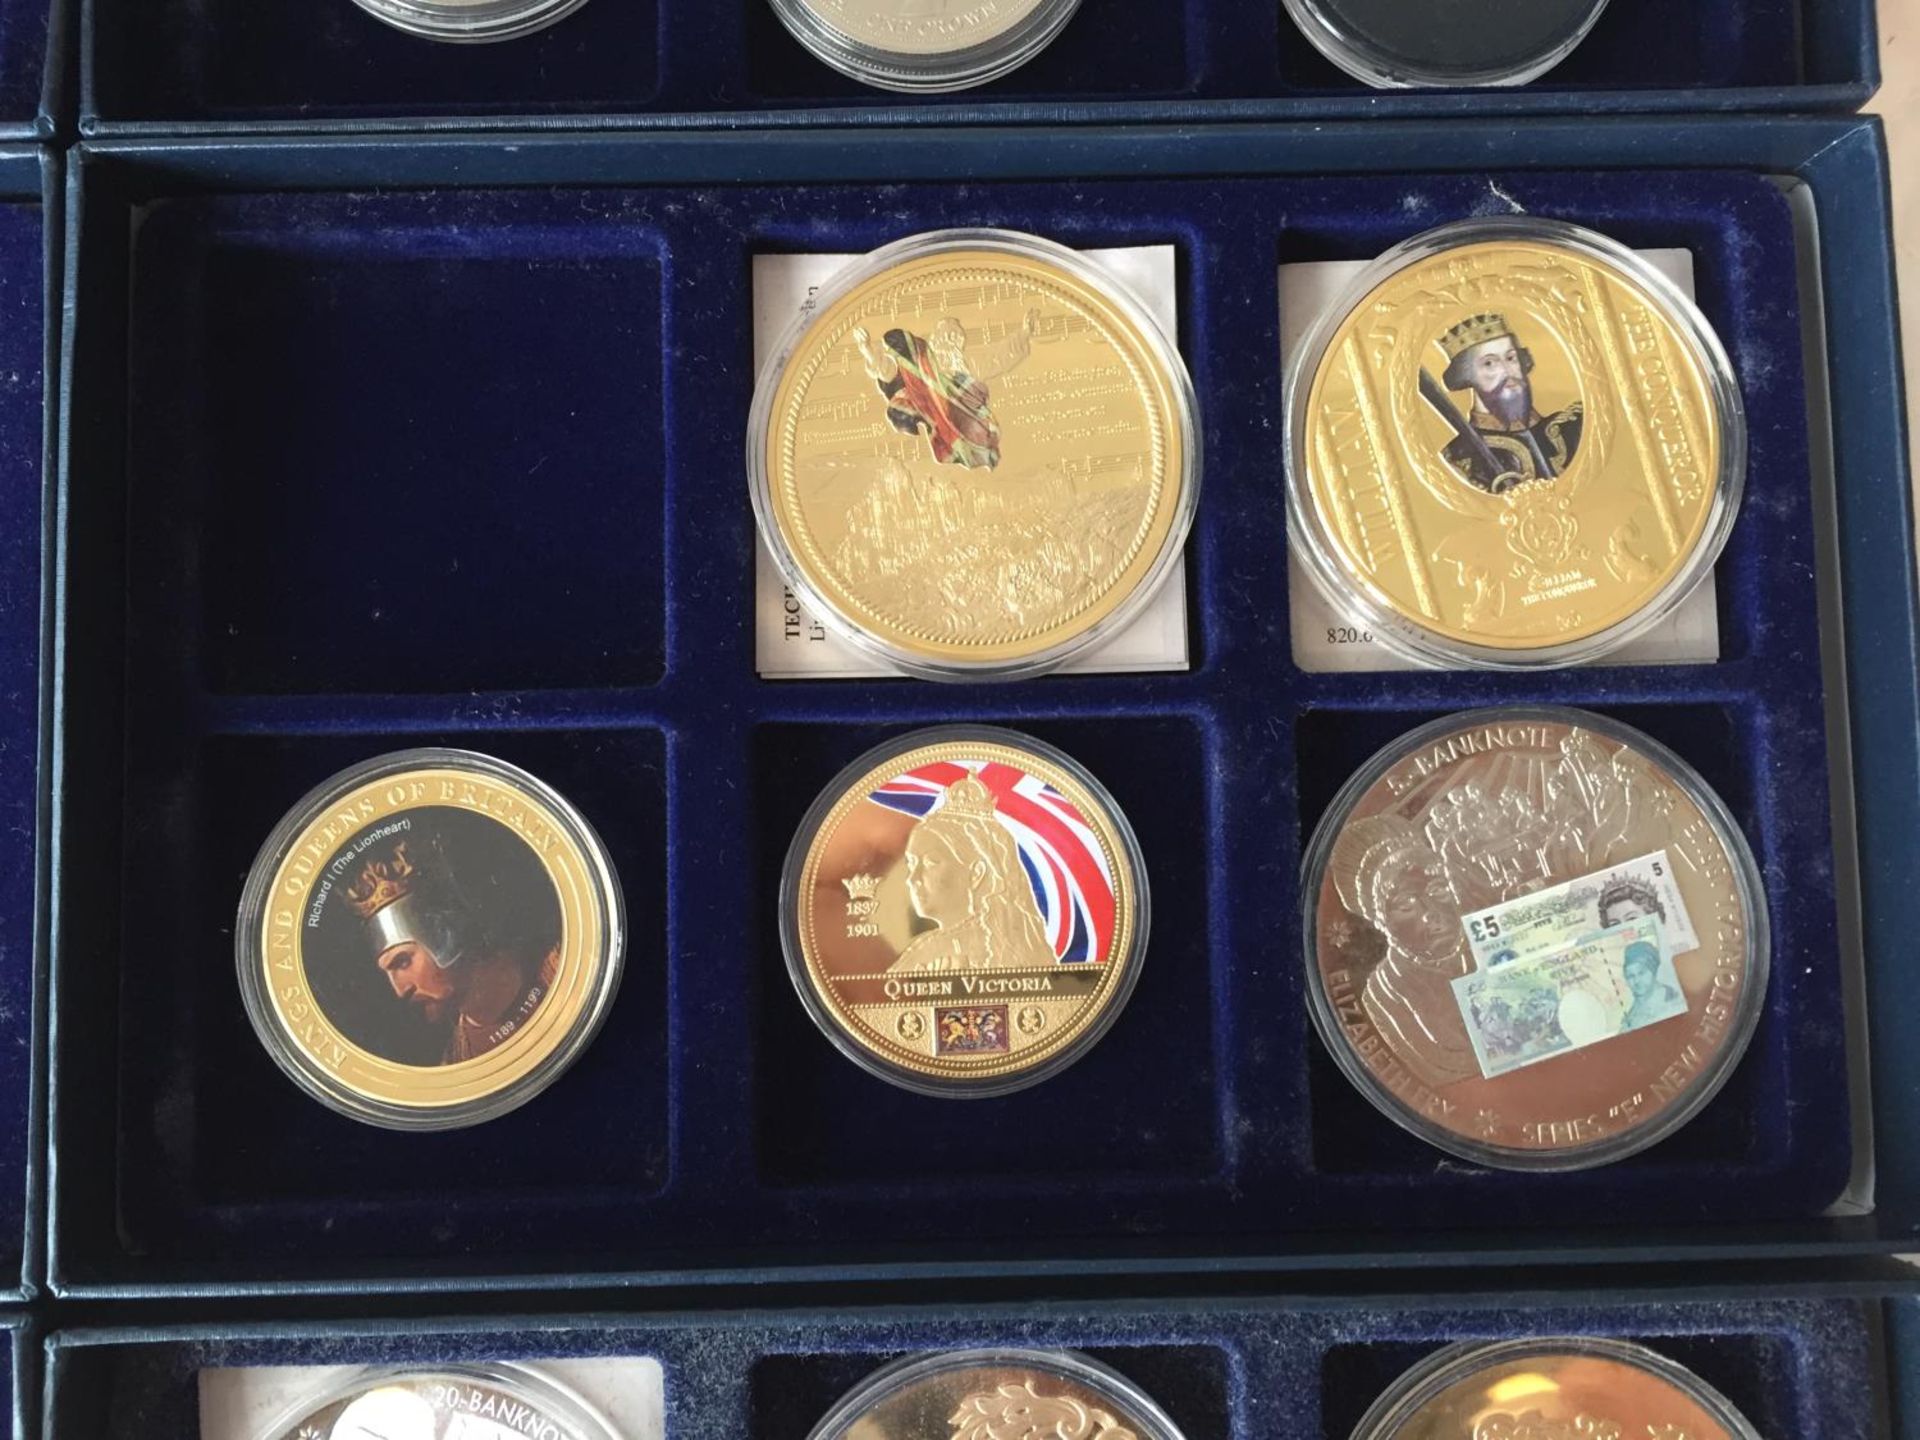 A COLLECTION OF COMMEMORATIVE COINS MOSTLY REPRESENTING VARIOUS MONARCHS ETC. IN CAPSULES, SOME - Image 6 of 7